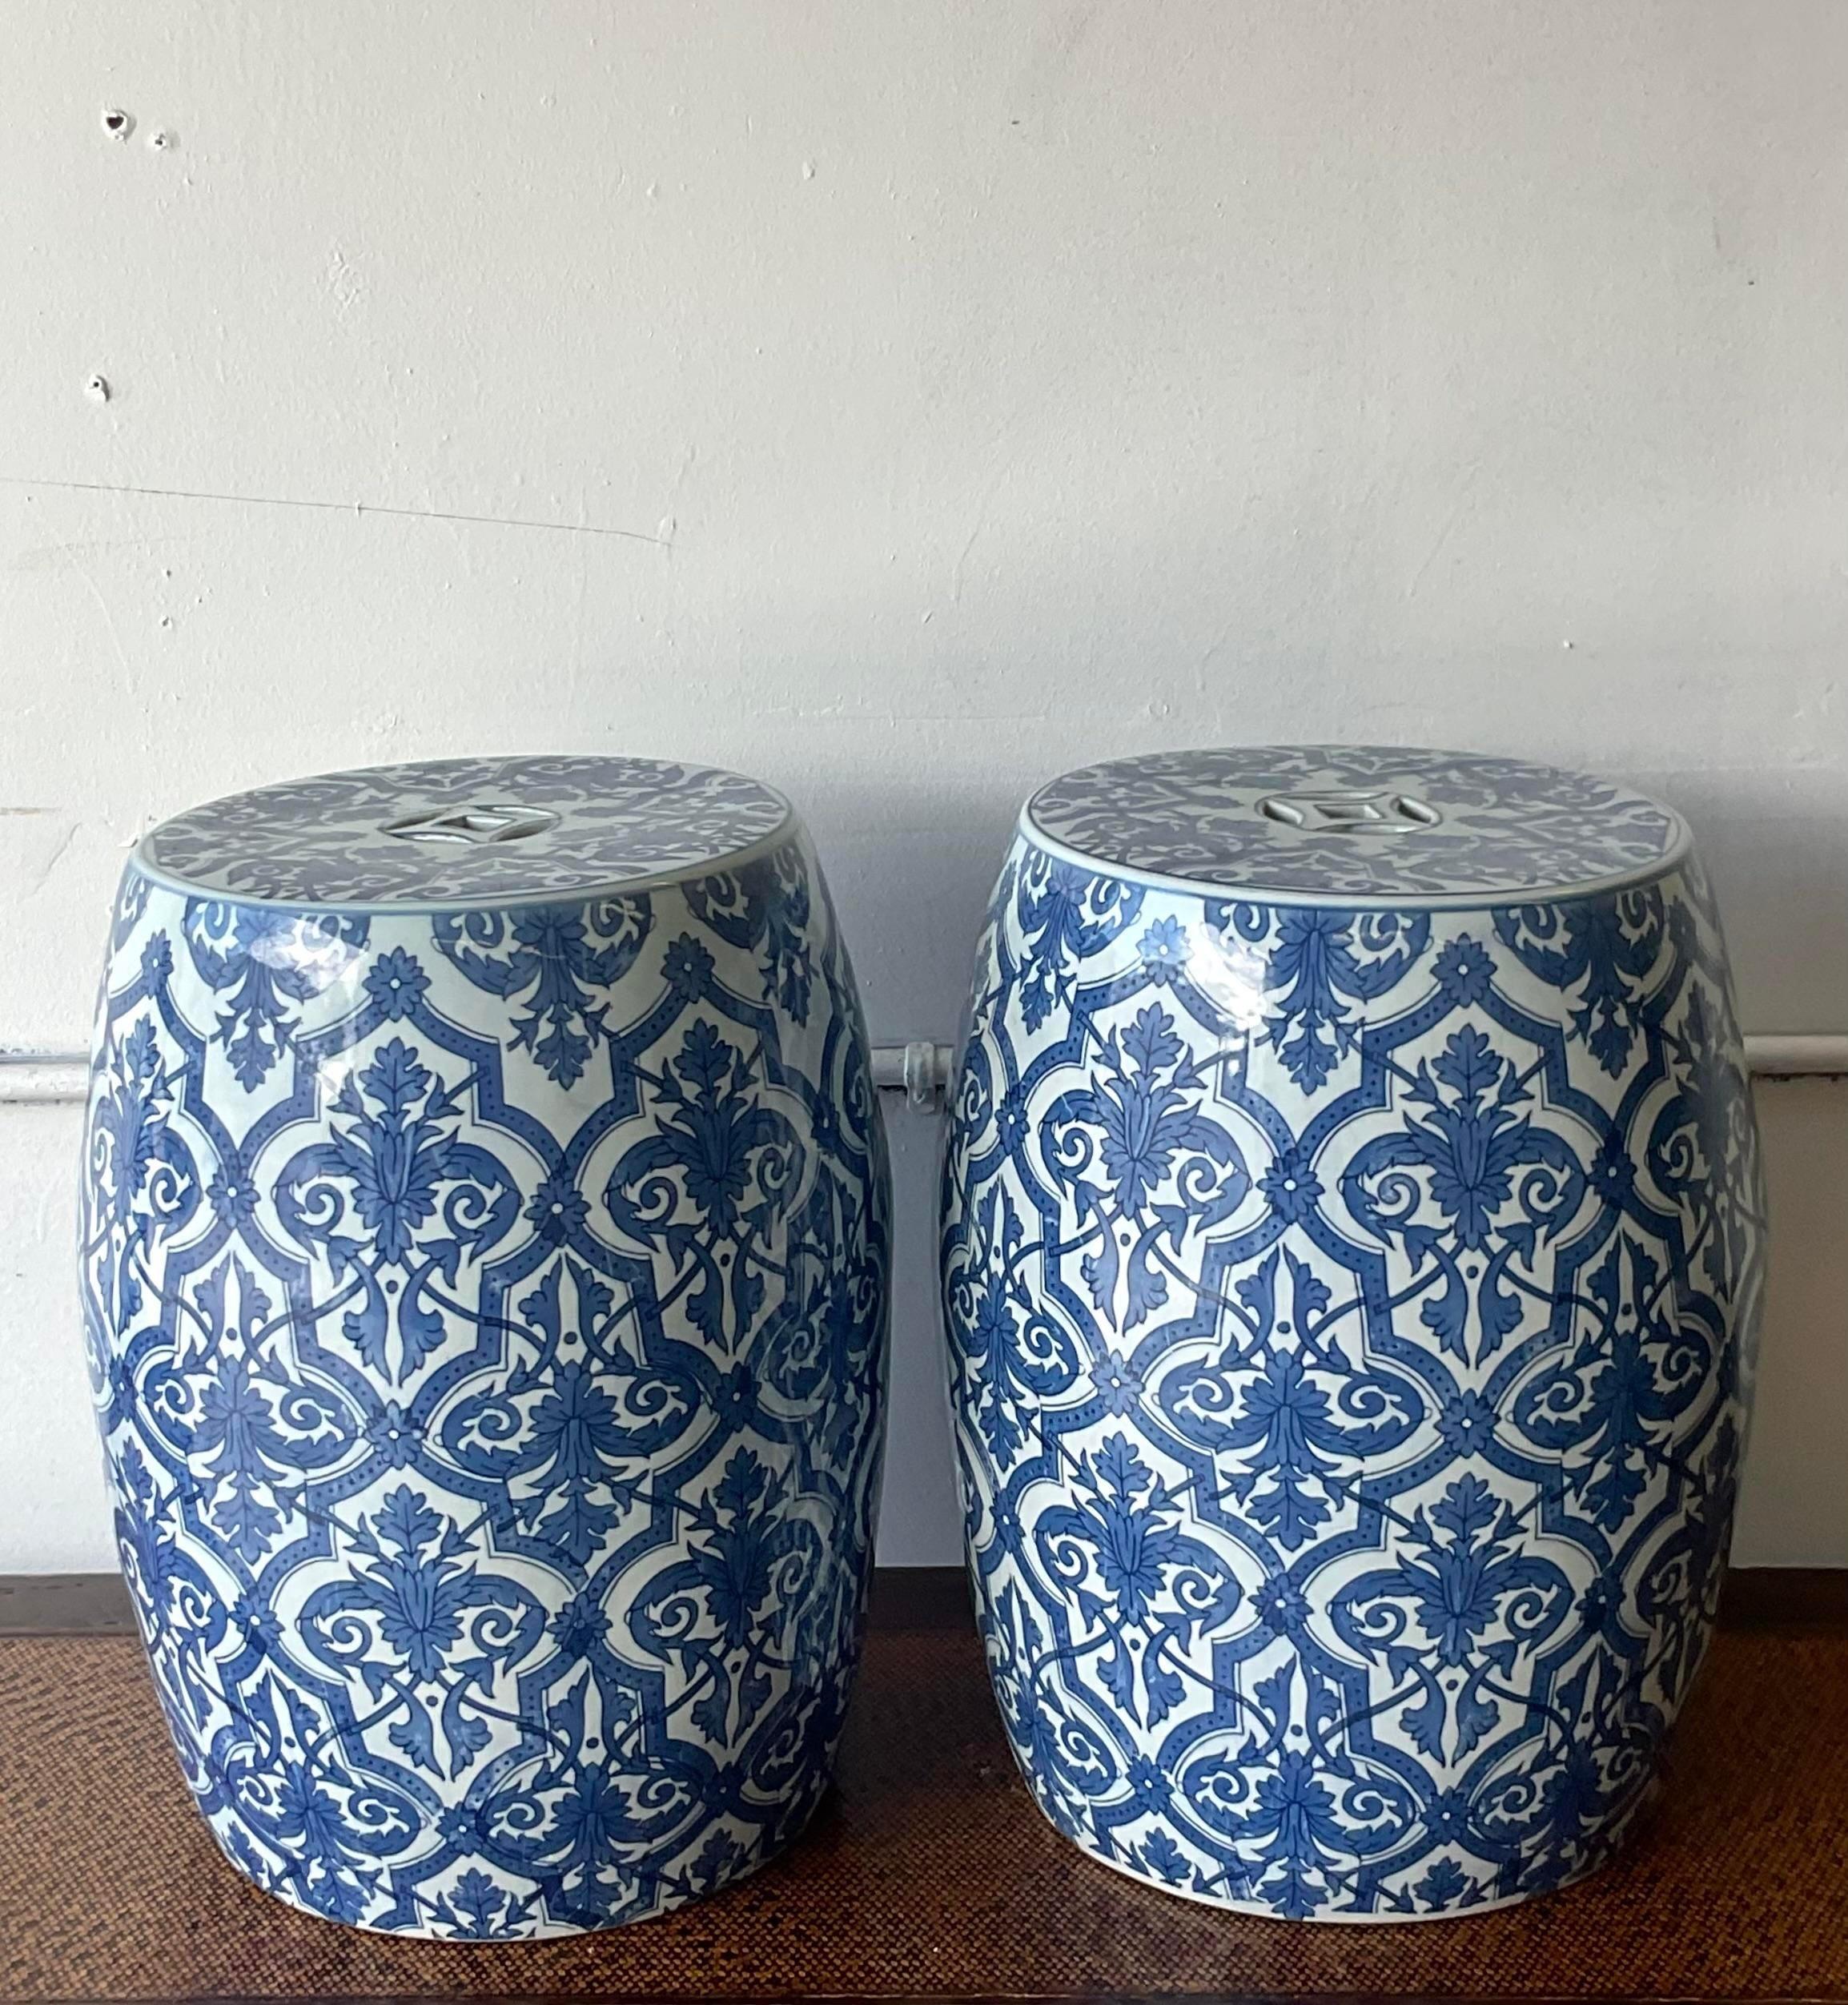 Vintage Coastal Blue and White Garden Stools - a Pair In Good Condition For Sale In west palm beach, FL